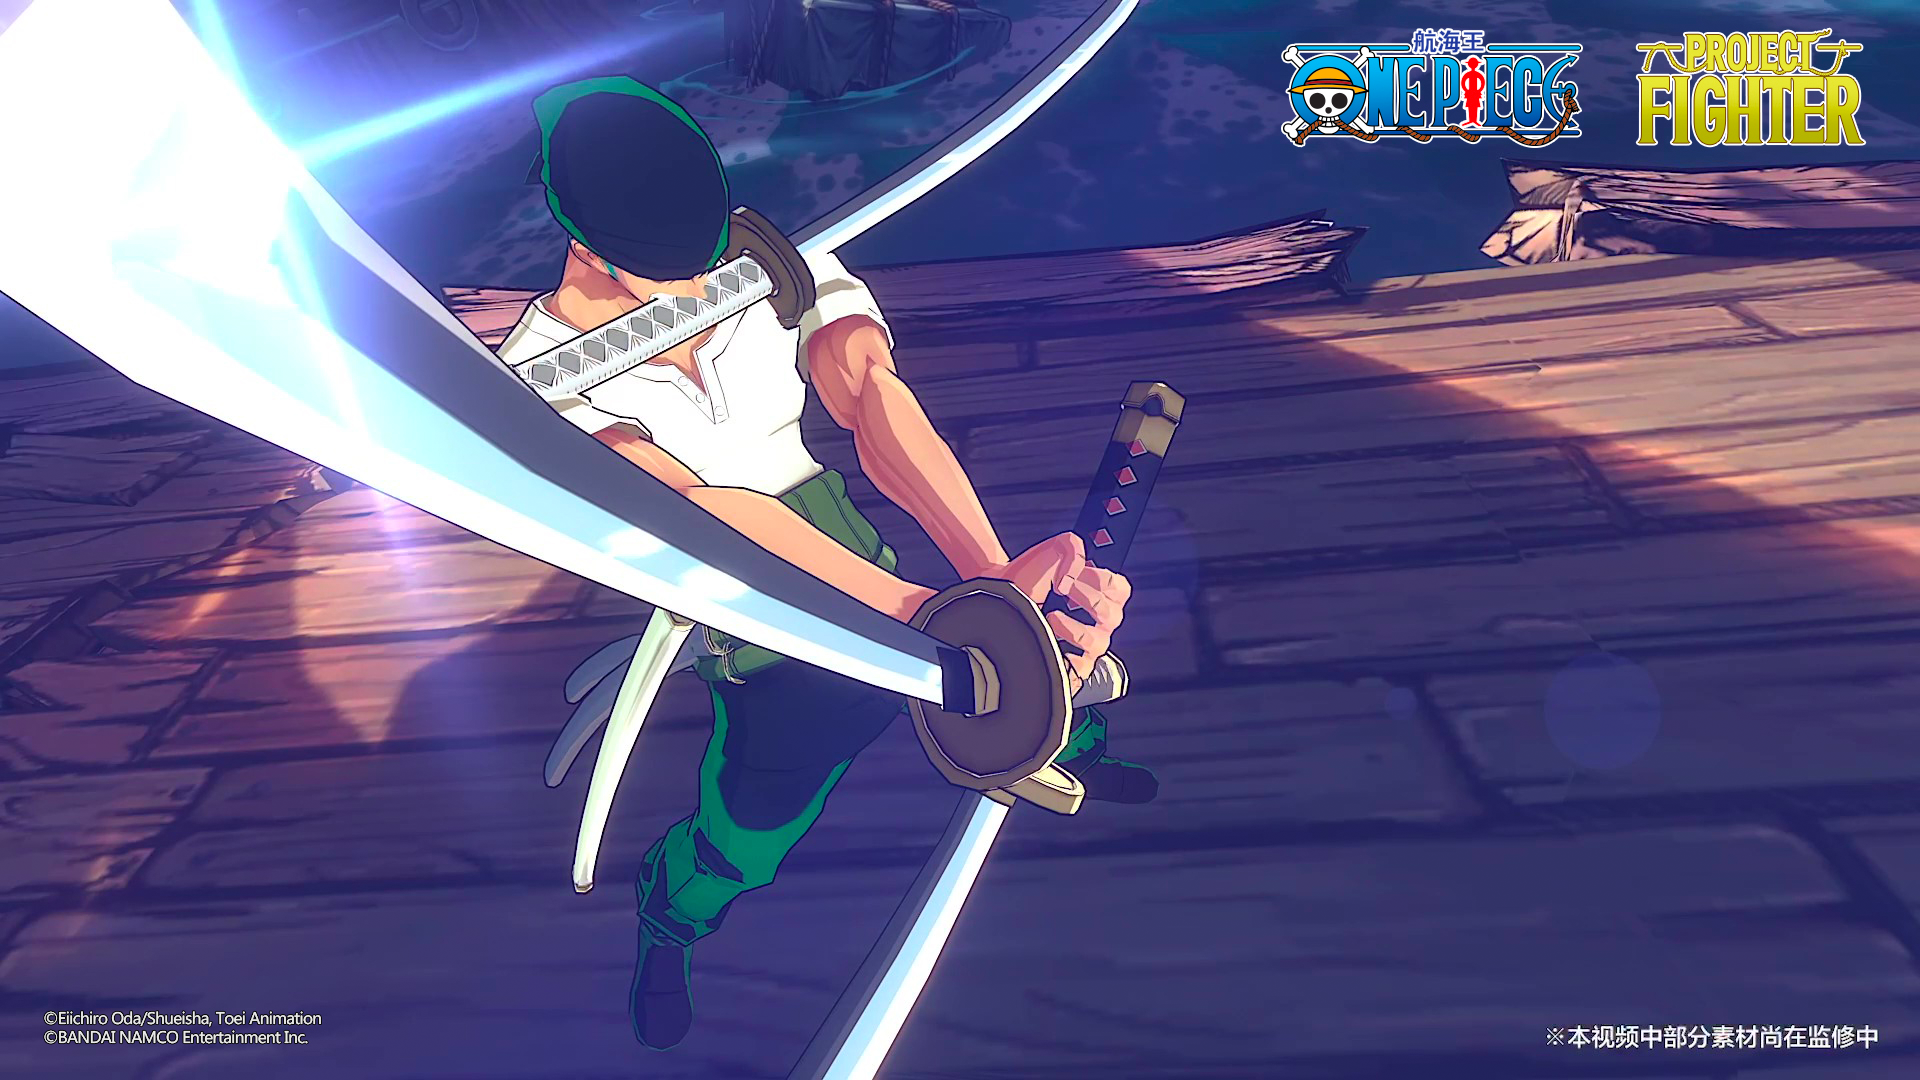 New 'One Piece: Project Fighter' Looks Like a Mobile Version of